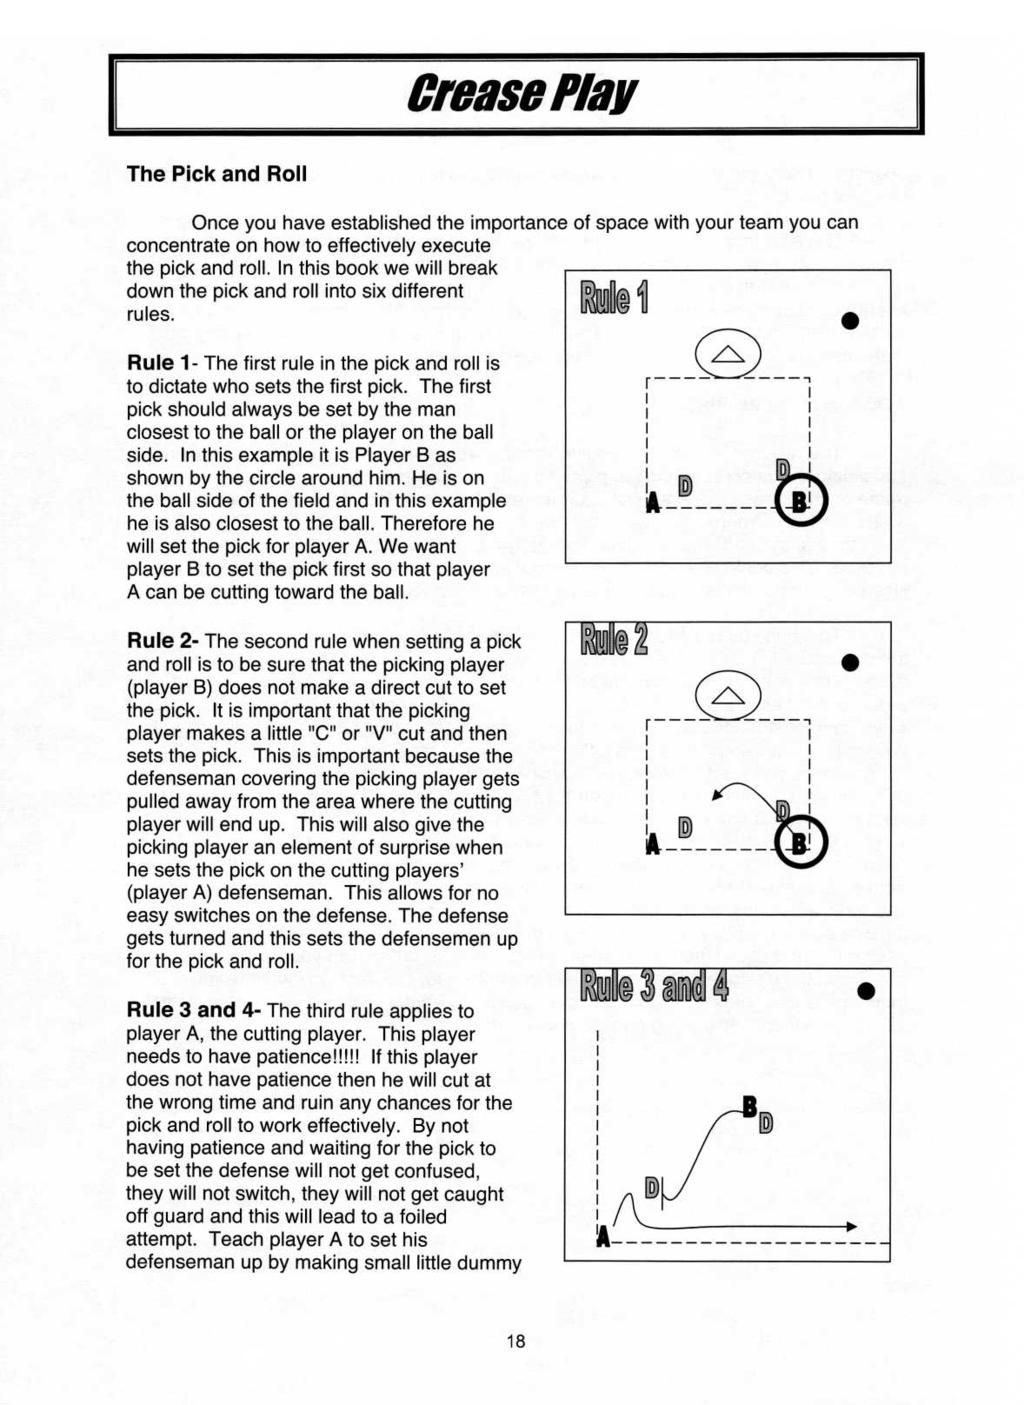 The Pick and Roll Once you have established the importance of space with your team you can concentrate on how to effectively execute the pick and roll.